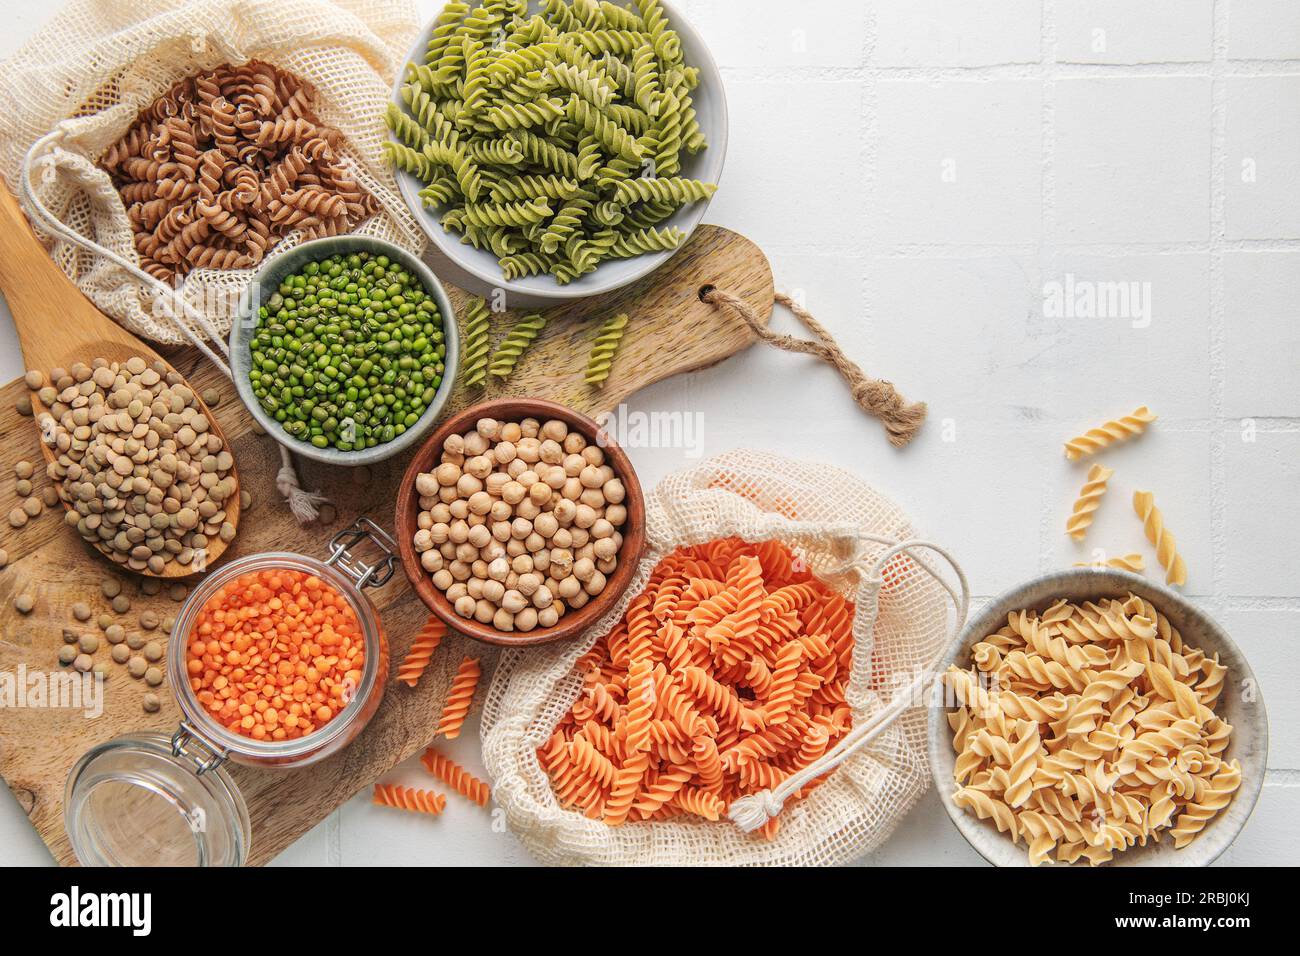 A variety of fusilli pasta made from different types of legumes, green and red lentils, mung beans and chickpeas. Gluten-free pasta. Stock Photo